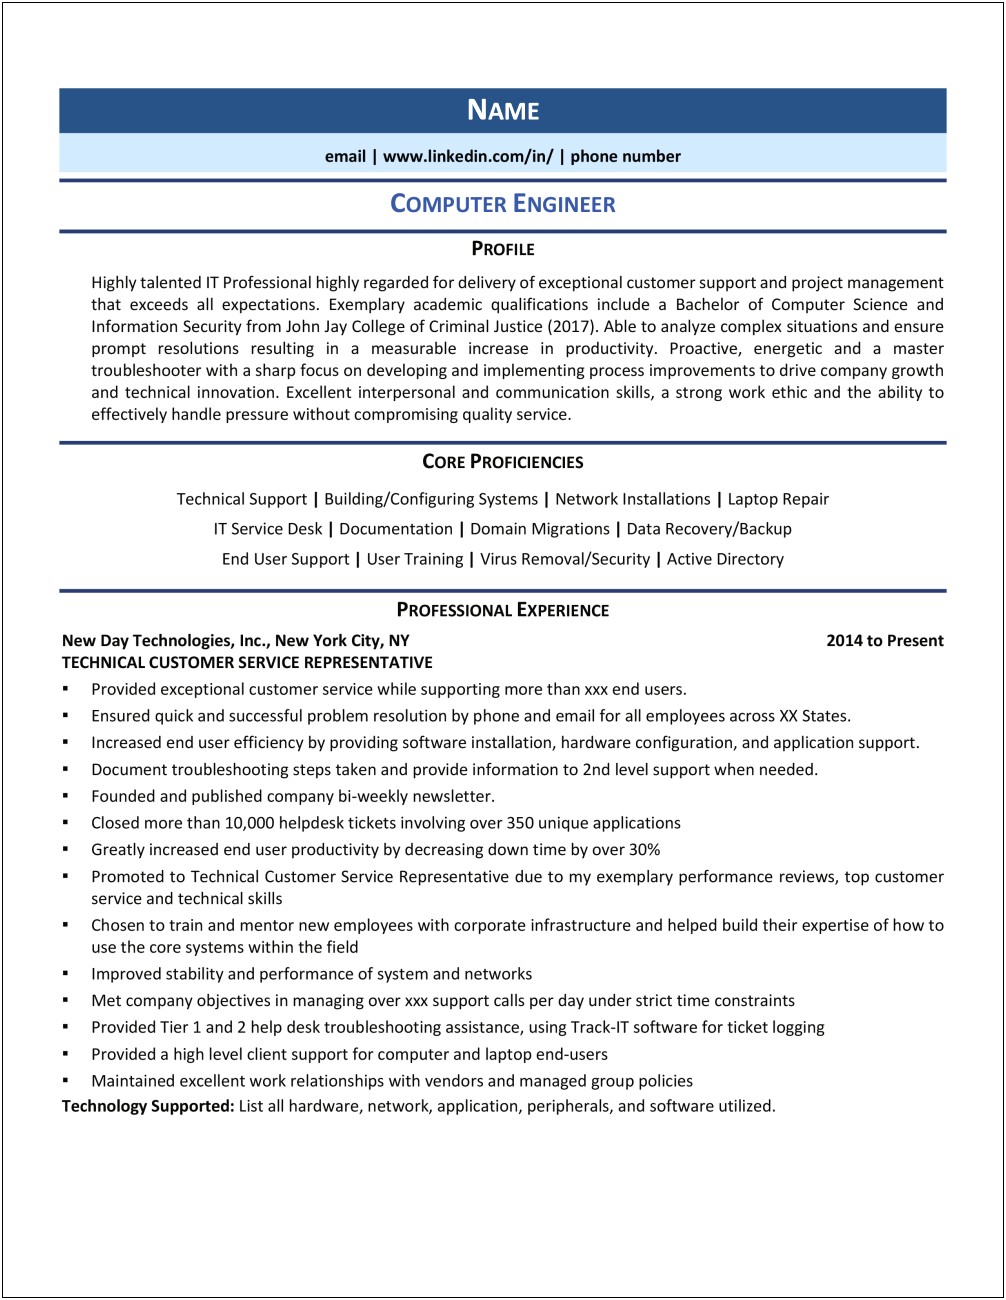 Best Phases For Computer Engineering Resume